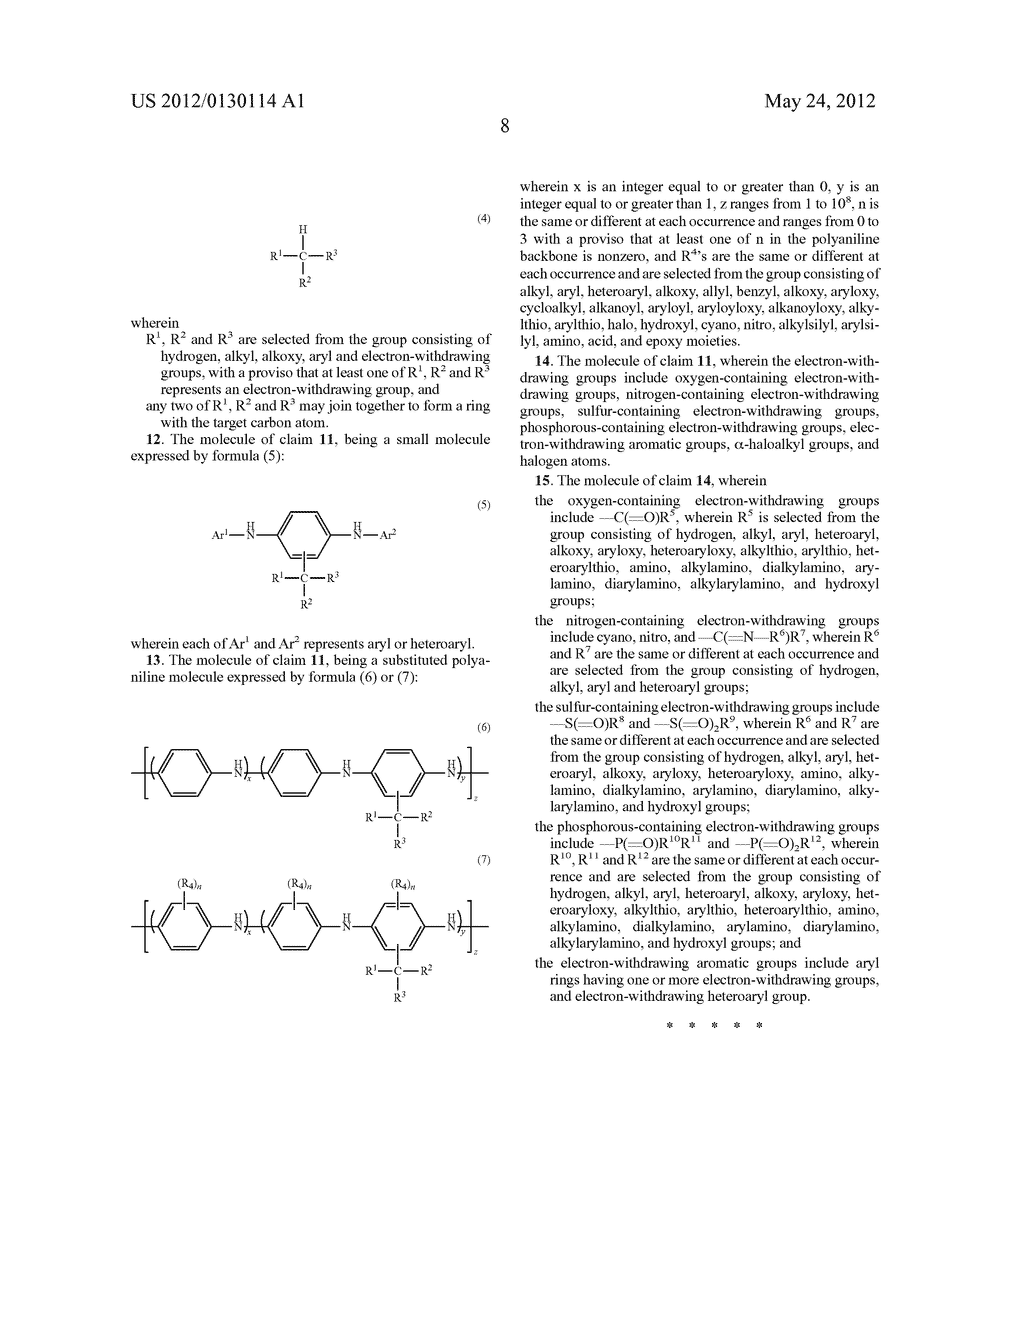 METHOD FOR DIRECT FUNCTIONALIZATION OF POLYANILINE AND OTHER MOLECULES     HAVING DIIMINOQUINOID RING VIA C-C BOND FORMATION, AND PRODUCT YIELDED     THEREWITH - diagram, schematic, and image 09